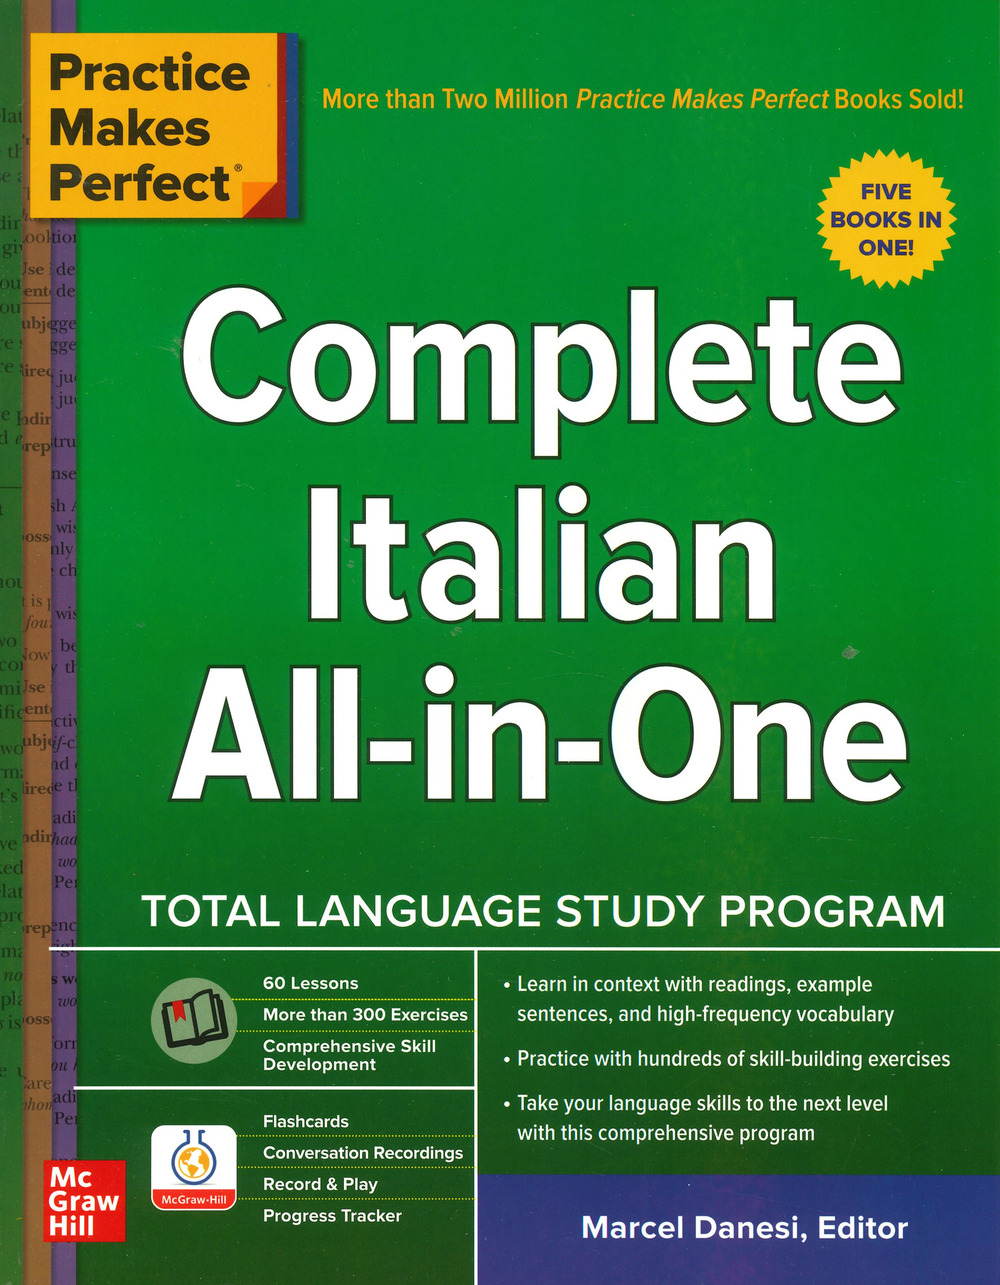 Practice makes perfect. Complete italian all-in-one